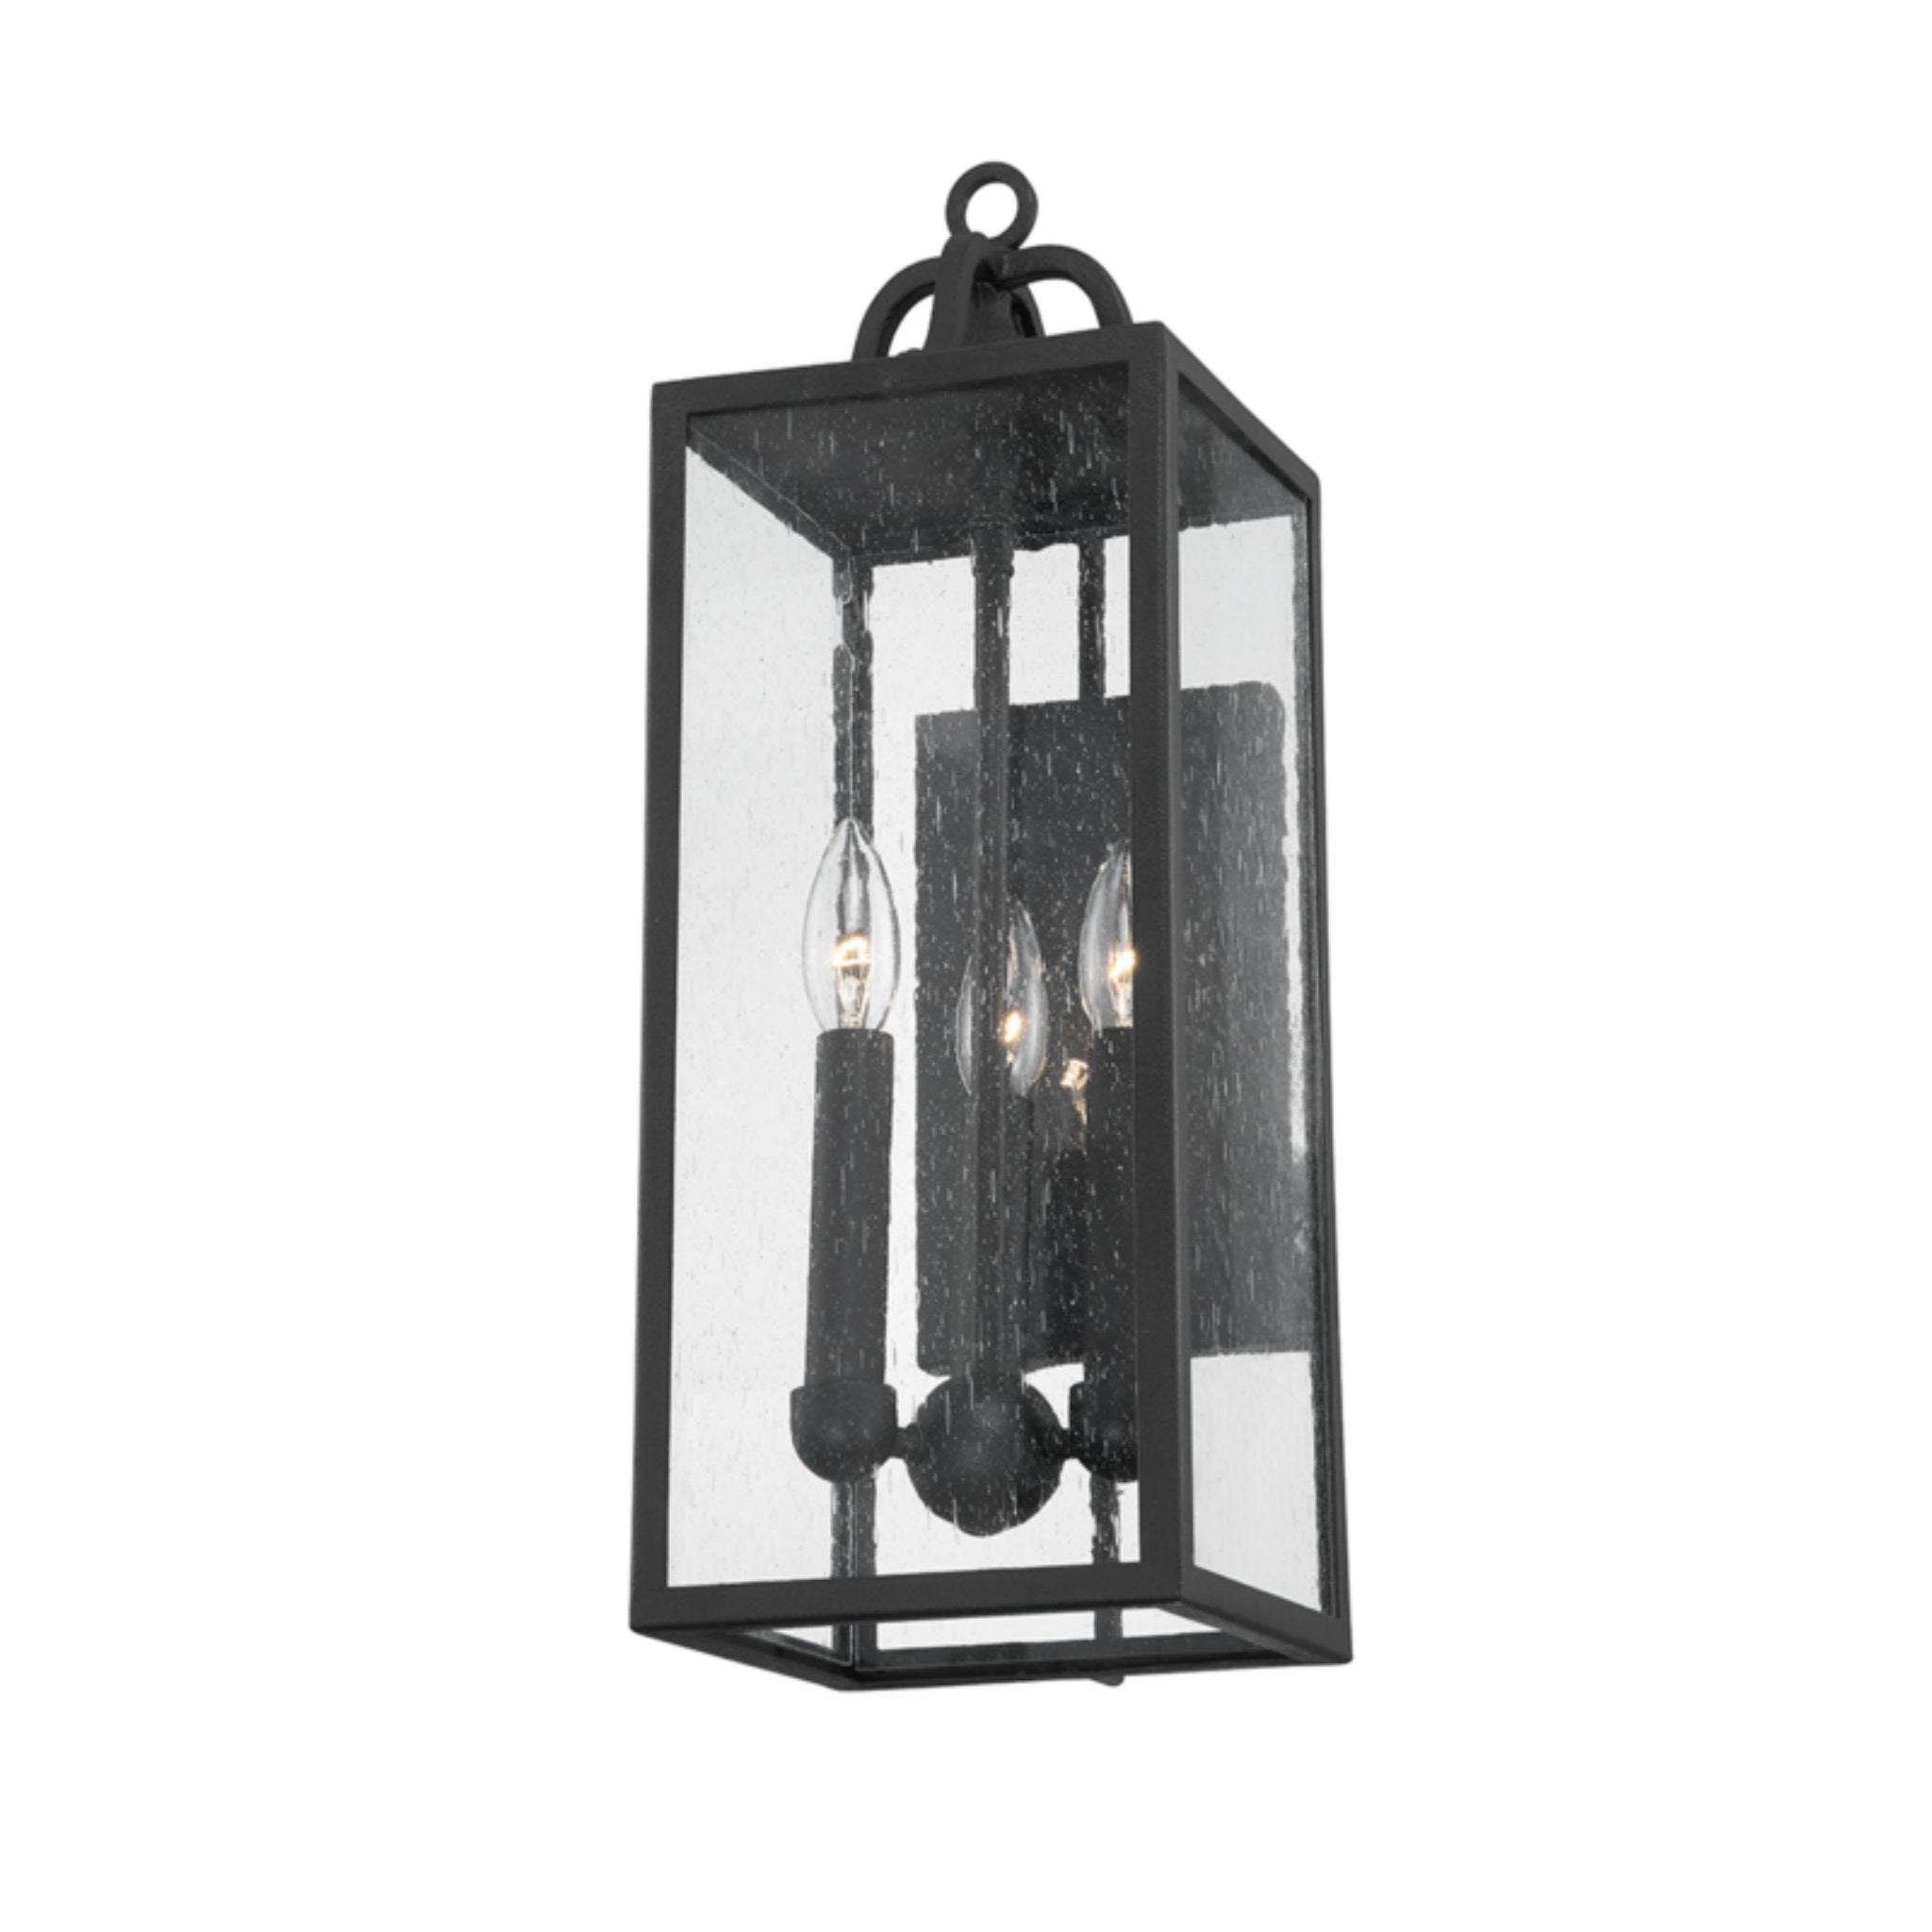 Caiden 3 Light Wall Sconce in Forged Iron